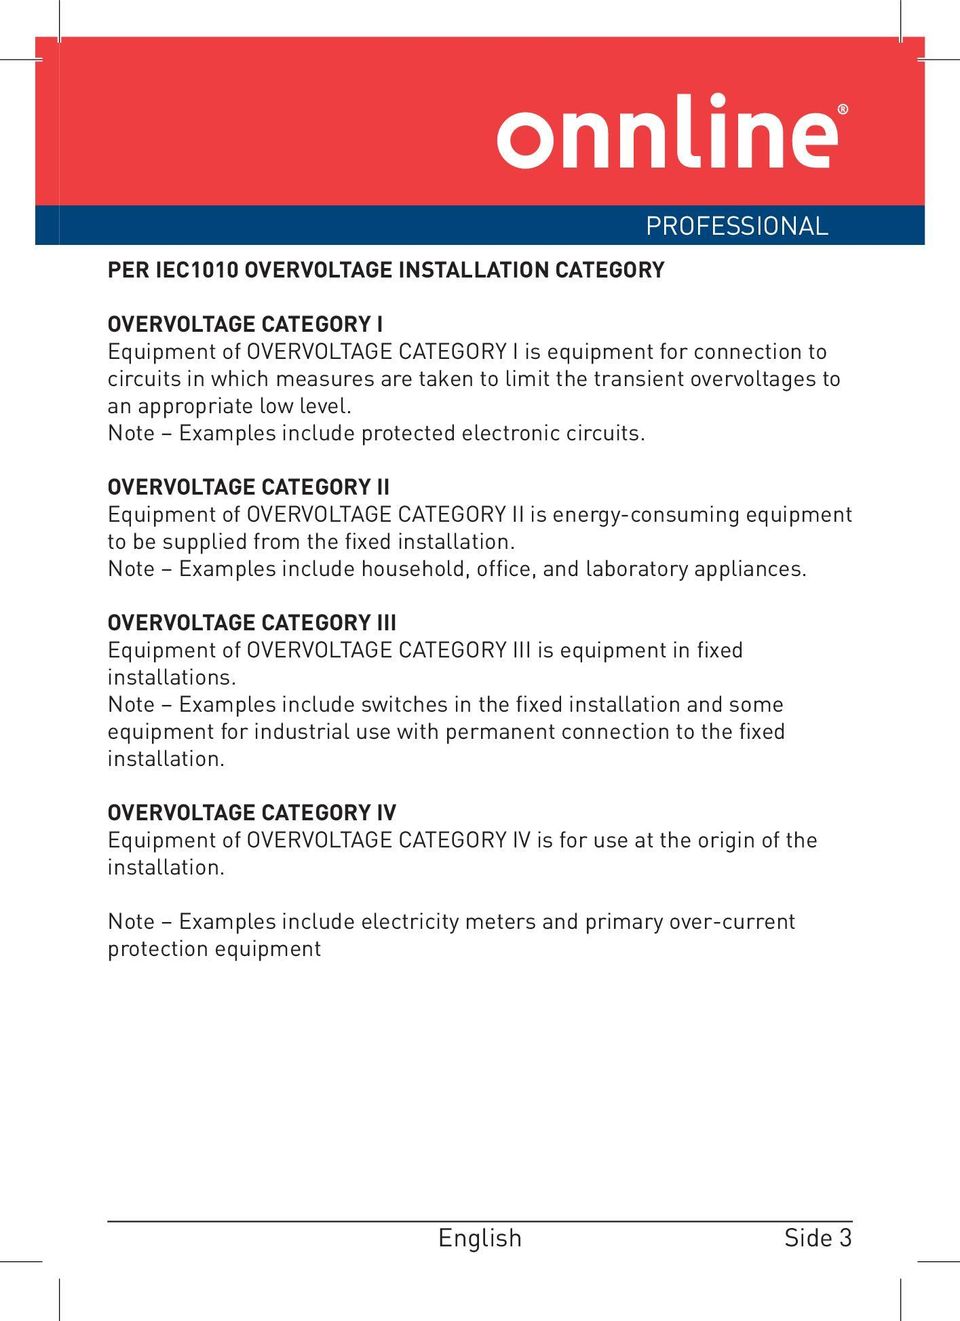 OVERVOLTAGE CATEGORY II Equipment of OVERVOLTAGE CATEGORY II is energy-consuming equipment to be supplied from the fixed installation.